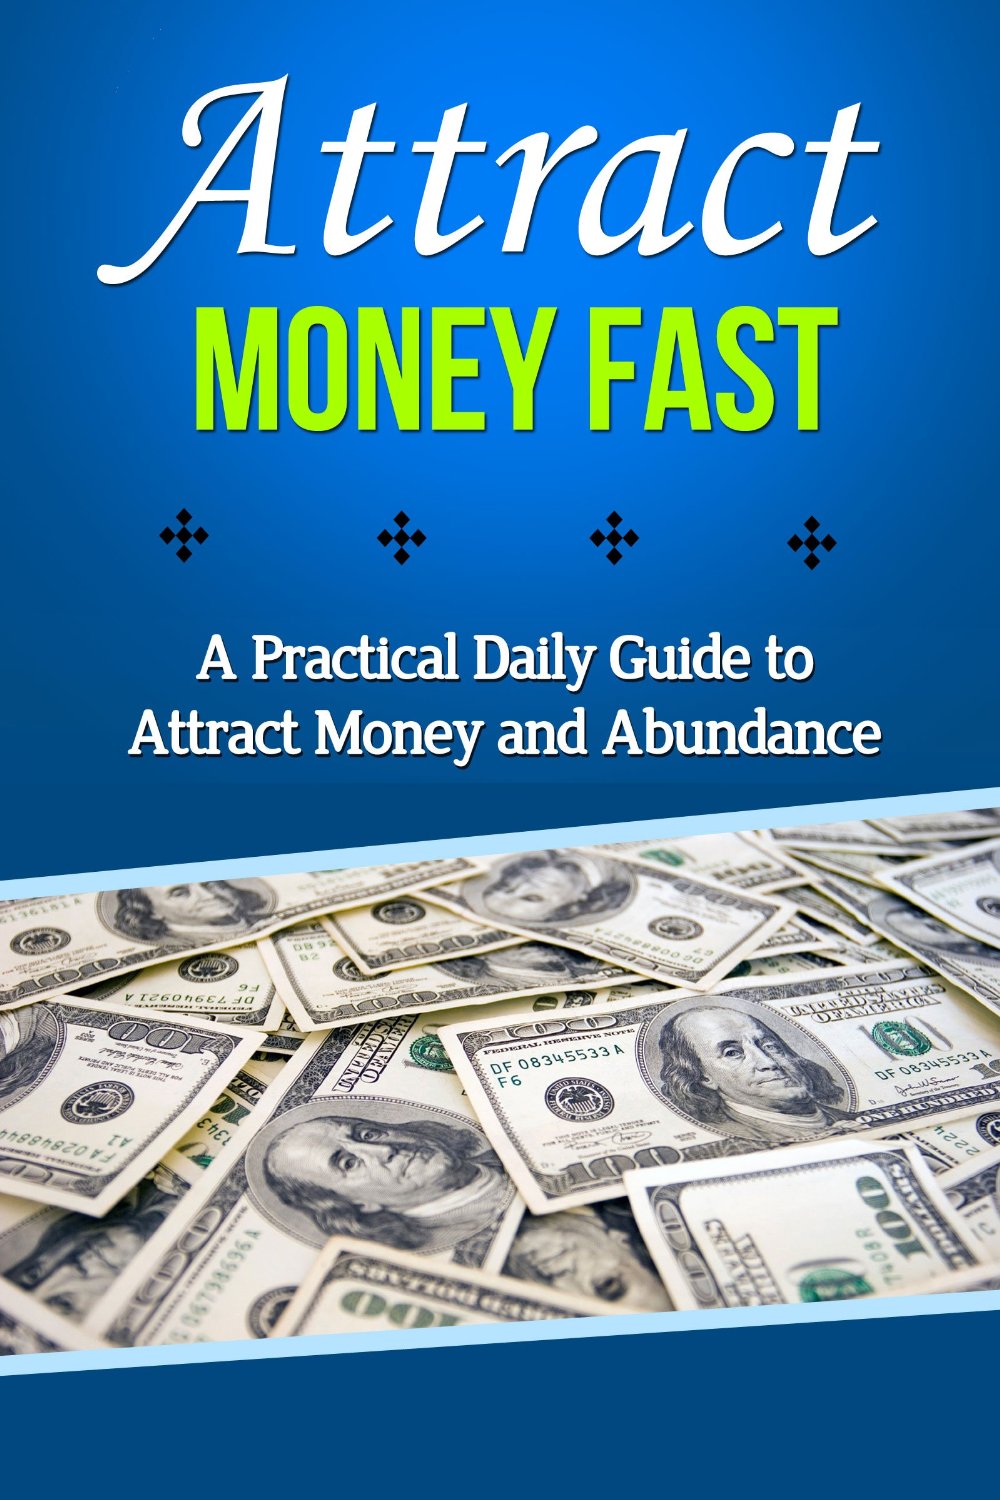 Attract Money Fast: A Practical Daily Guide to Attract Money and Abundance by Michael Holmwood